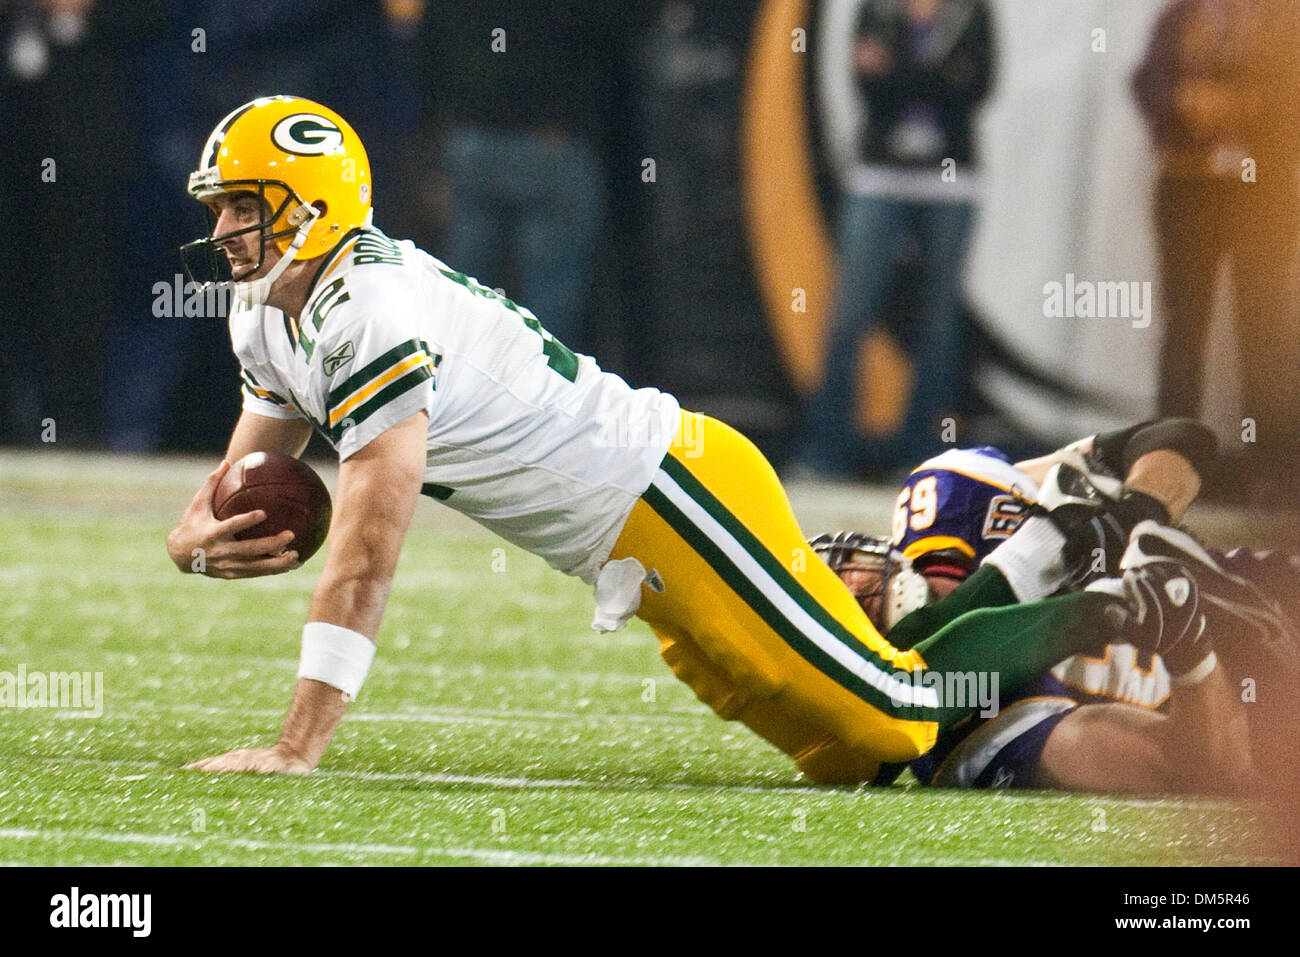 Nov. 21, 2009 - Minneapolis, Minnesota, United States of America - Green Bay Packers quarterback Aaron Rodgers (#12) is sacked by Minnesota Vikings defensive end Jared Allen (#69) during the game between the Green Bay Packers and the Minnesota Vikings at the Mall of America Field in Minneapolis, Minnesota.  The Packers defeated the Vikings 31-3. (Credit Image: © Marilyn Indahl/Sout Stock Photo